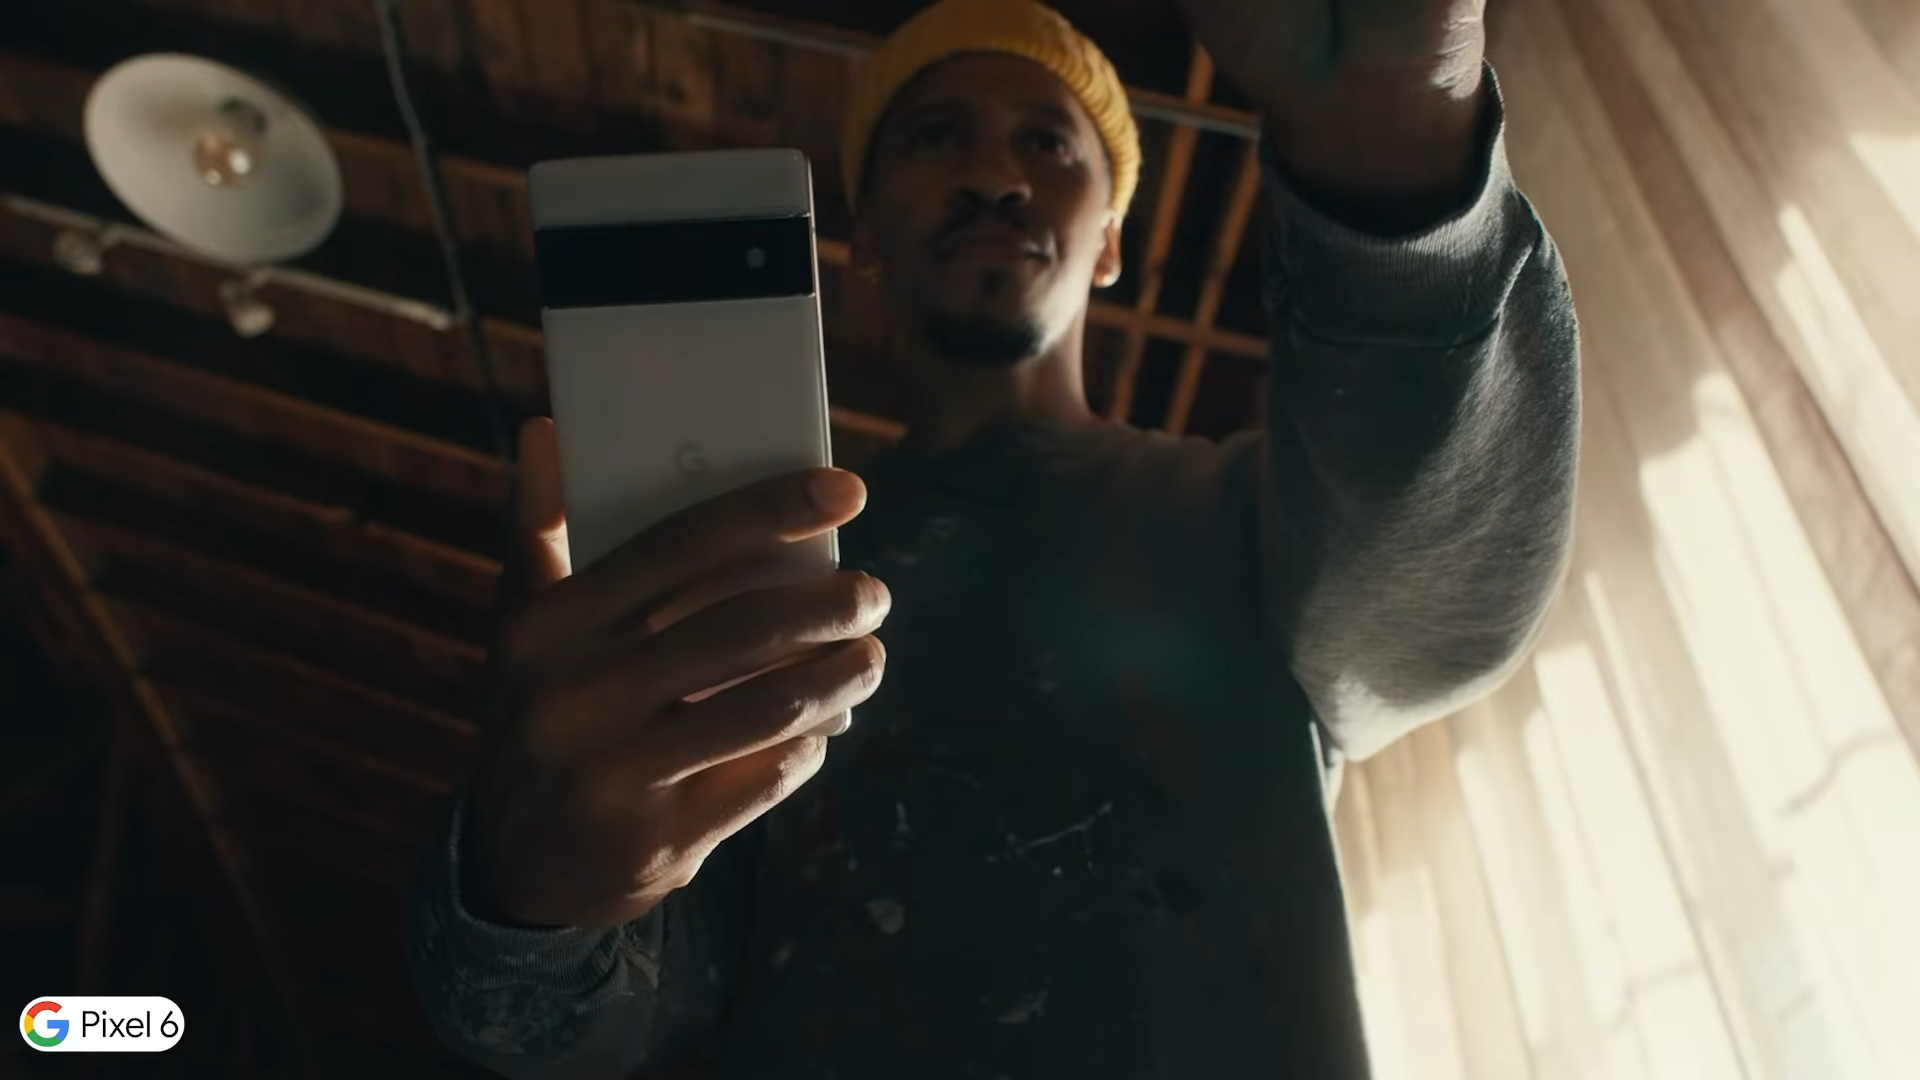 Pixel 6 in hand pulled from Google Pixel 6 ad